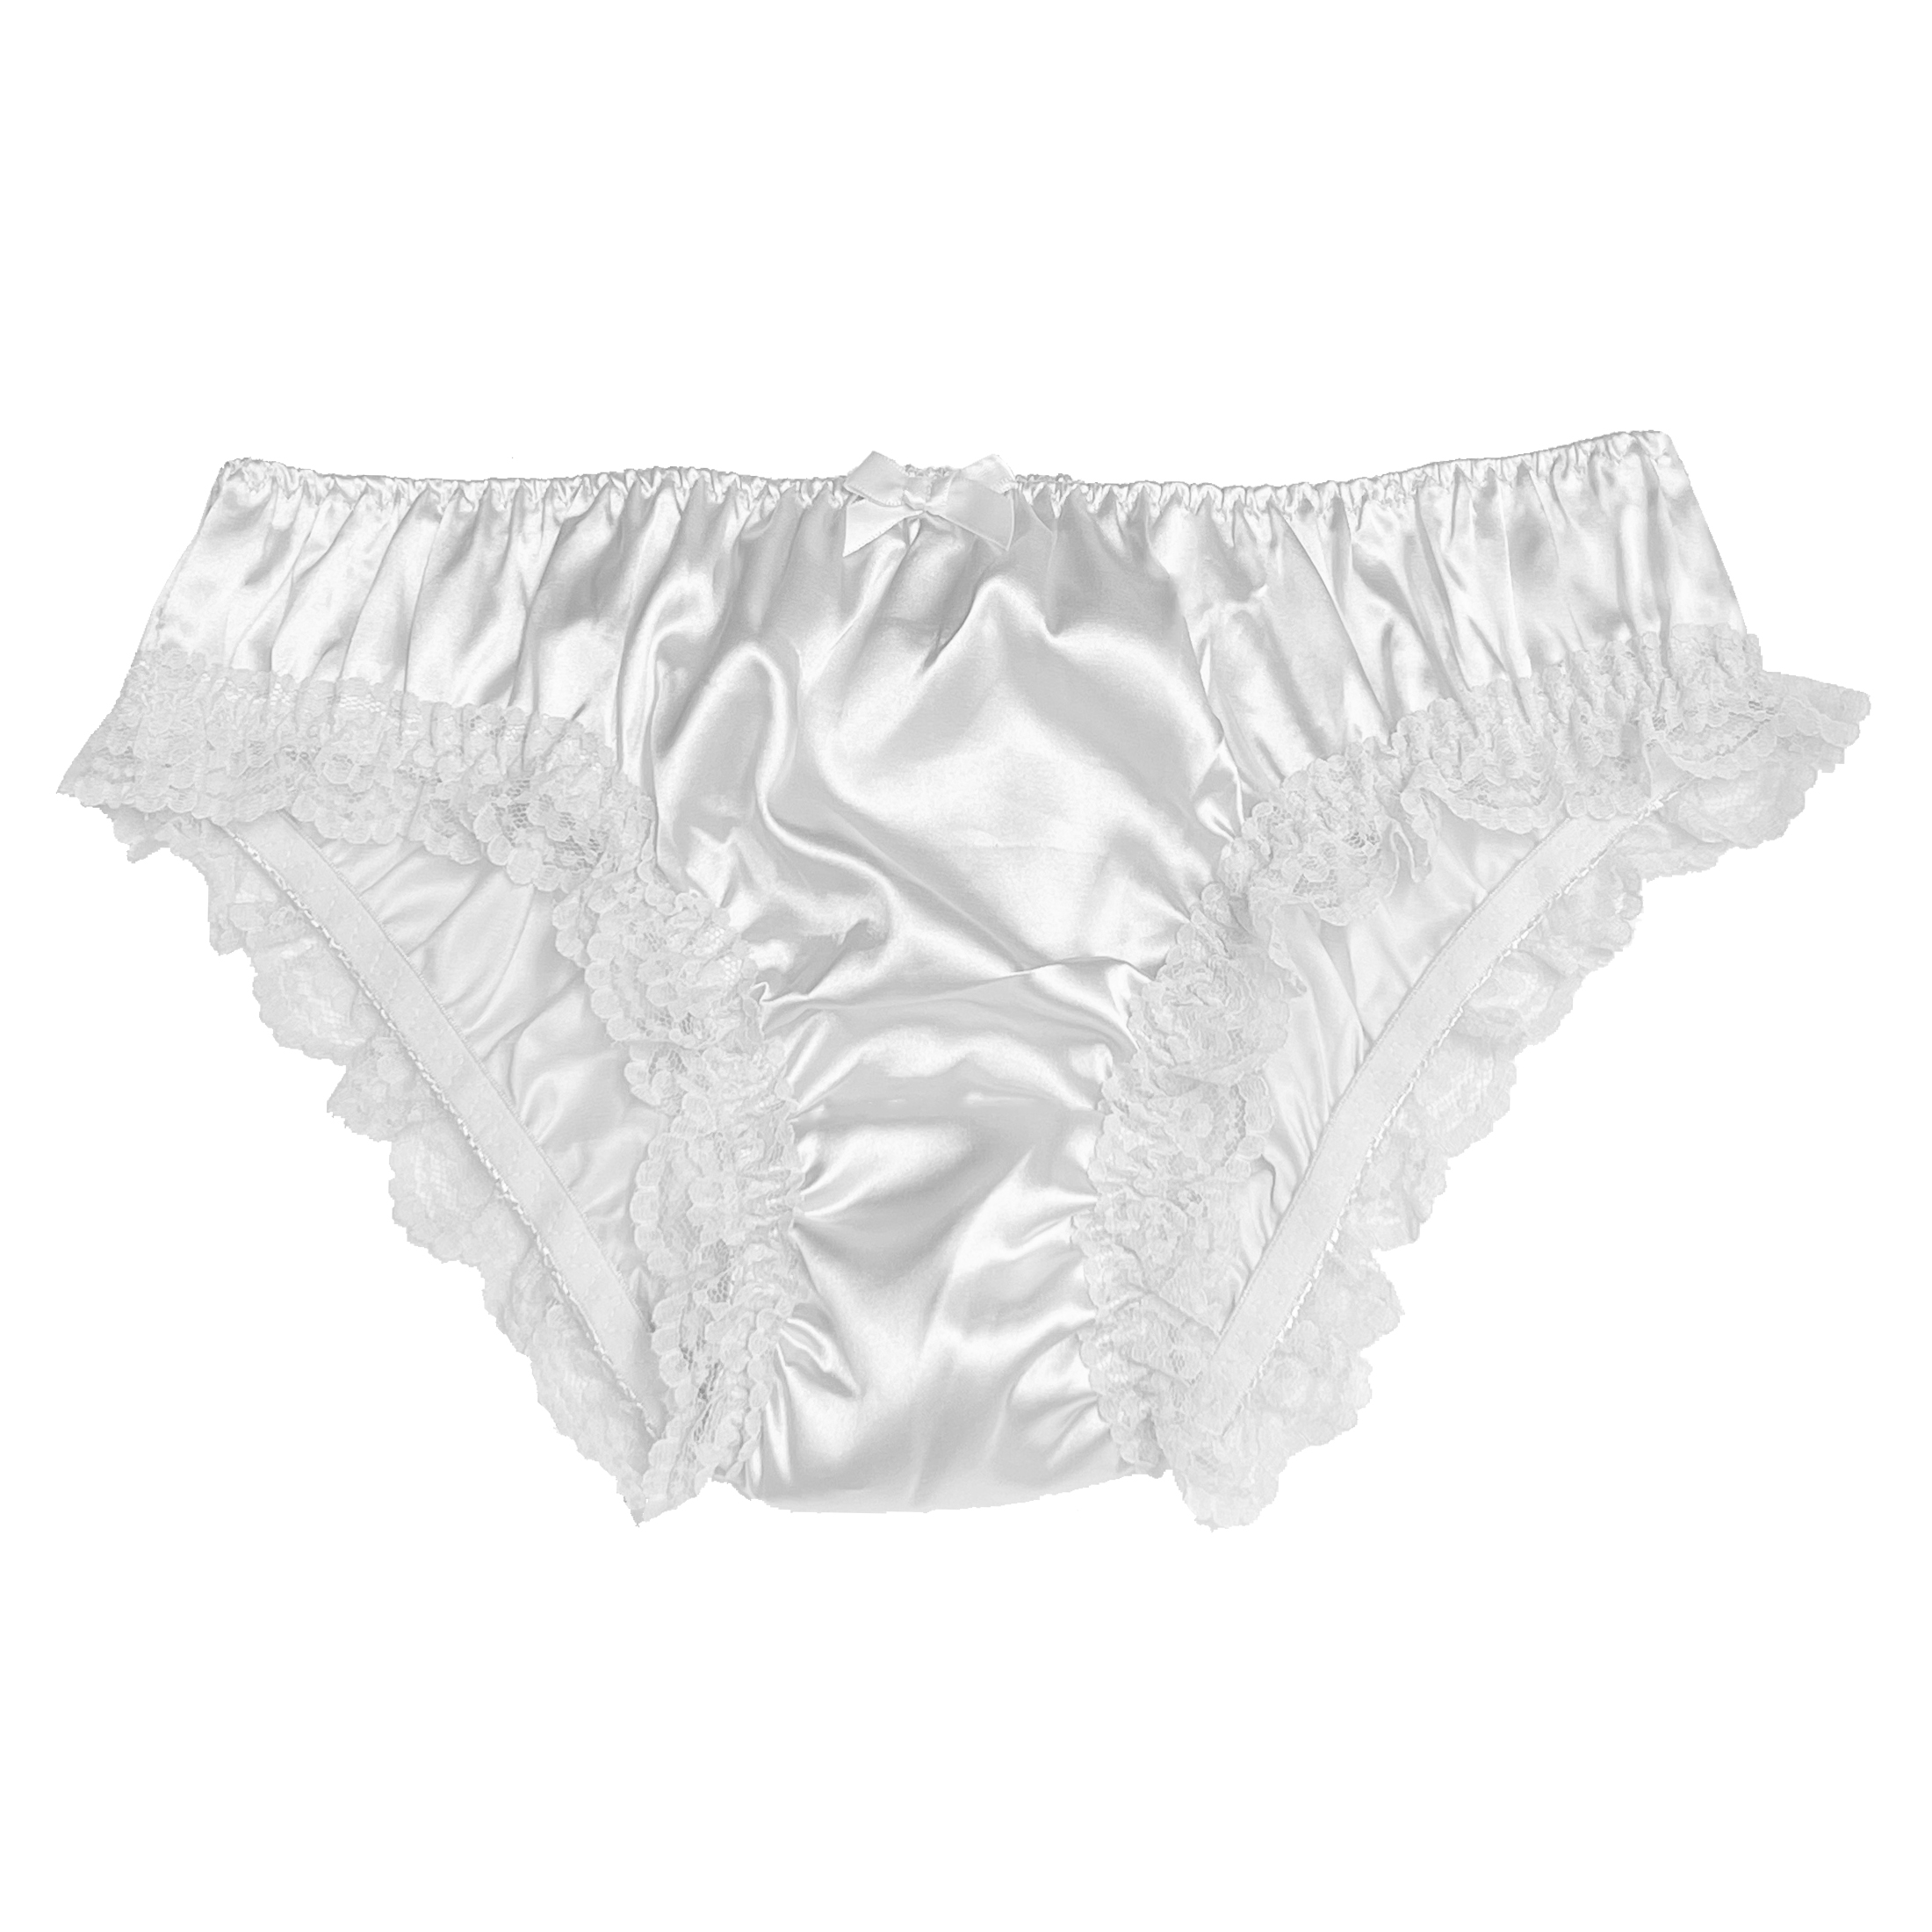 White Satin Lace Frilly Sissy Cdtv Full Panties Knicker Underwear S Xxl 16 96 Picclick